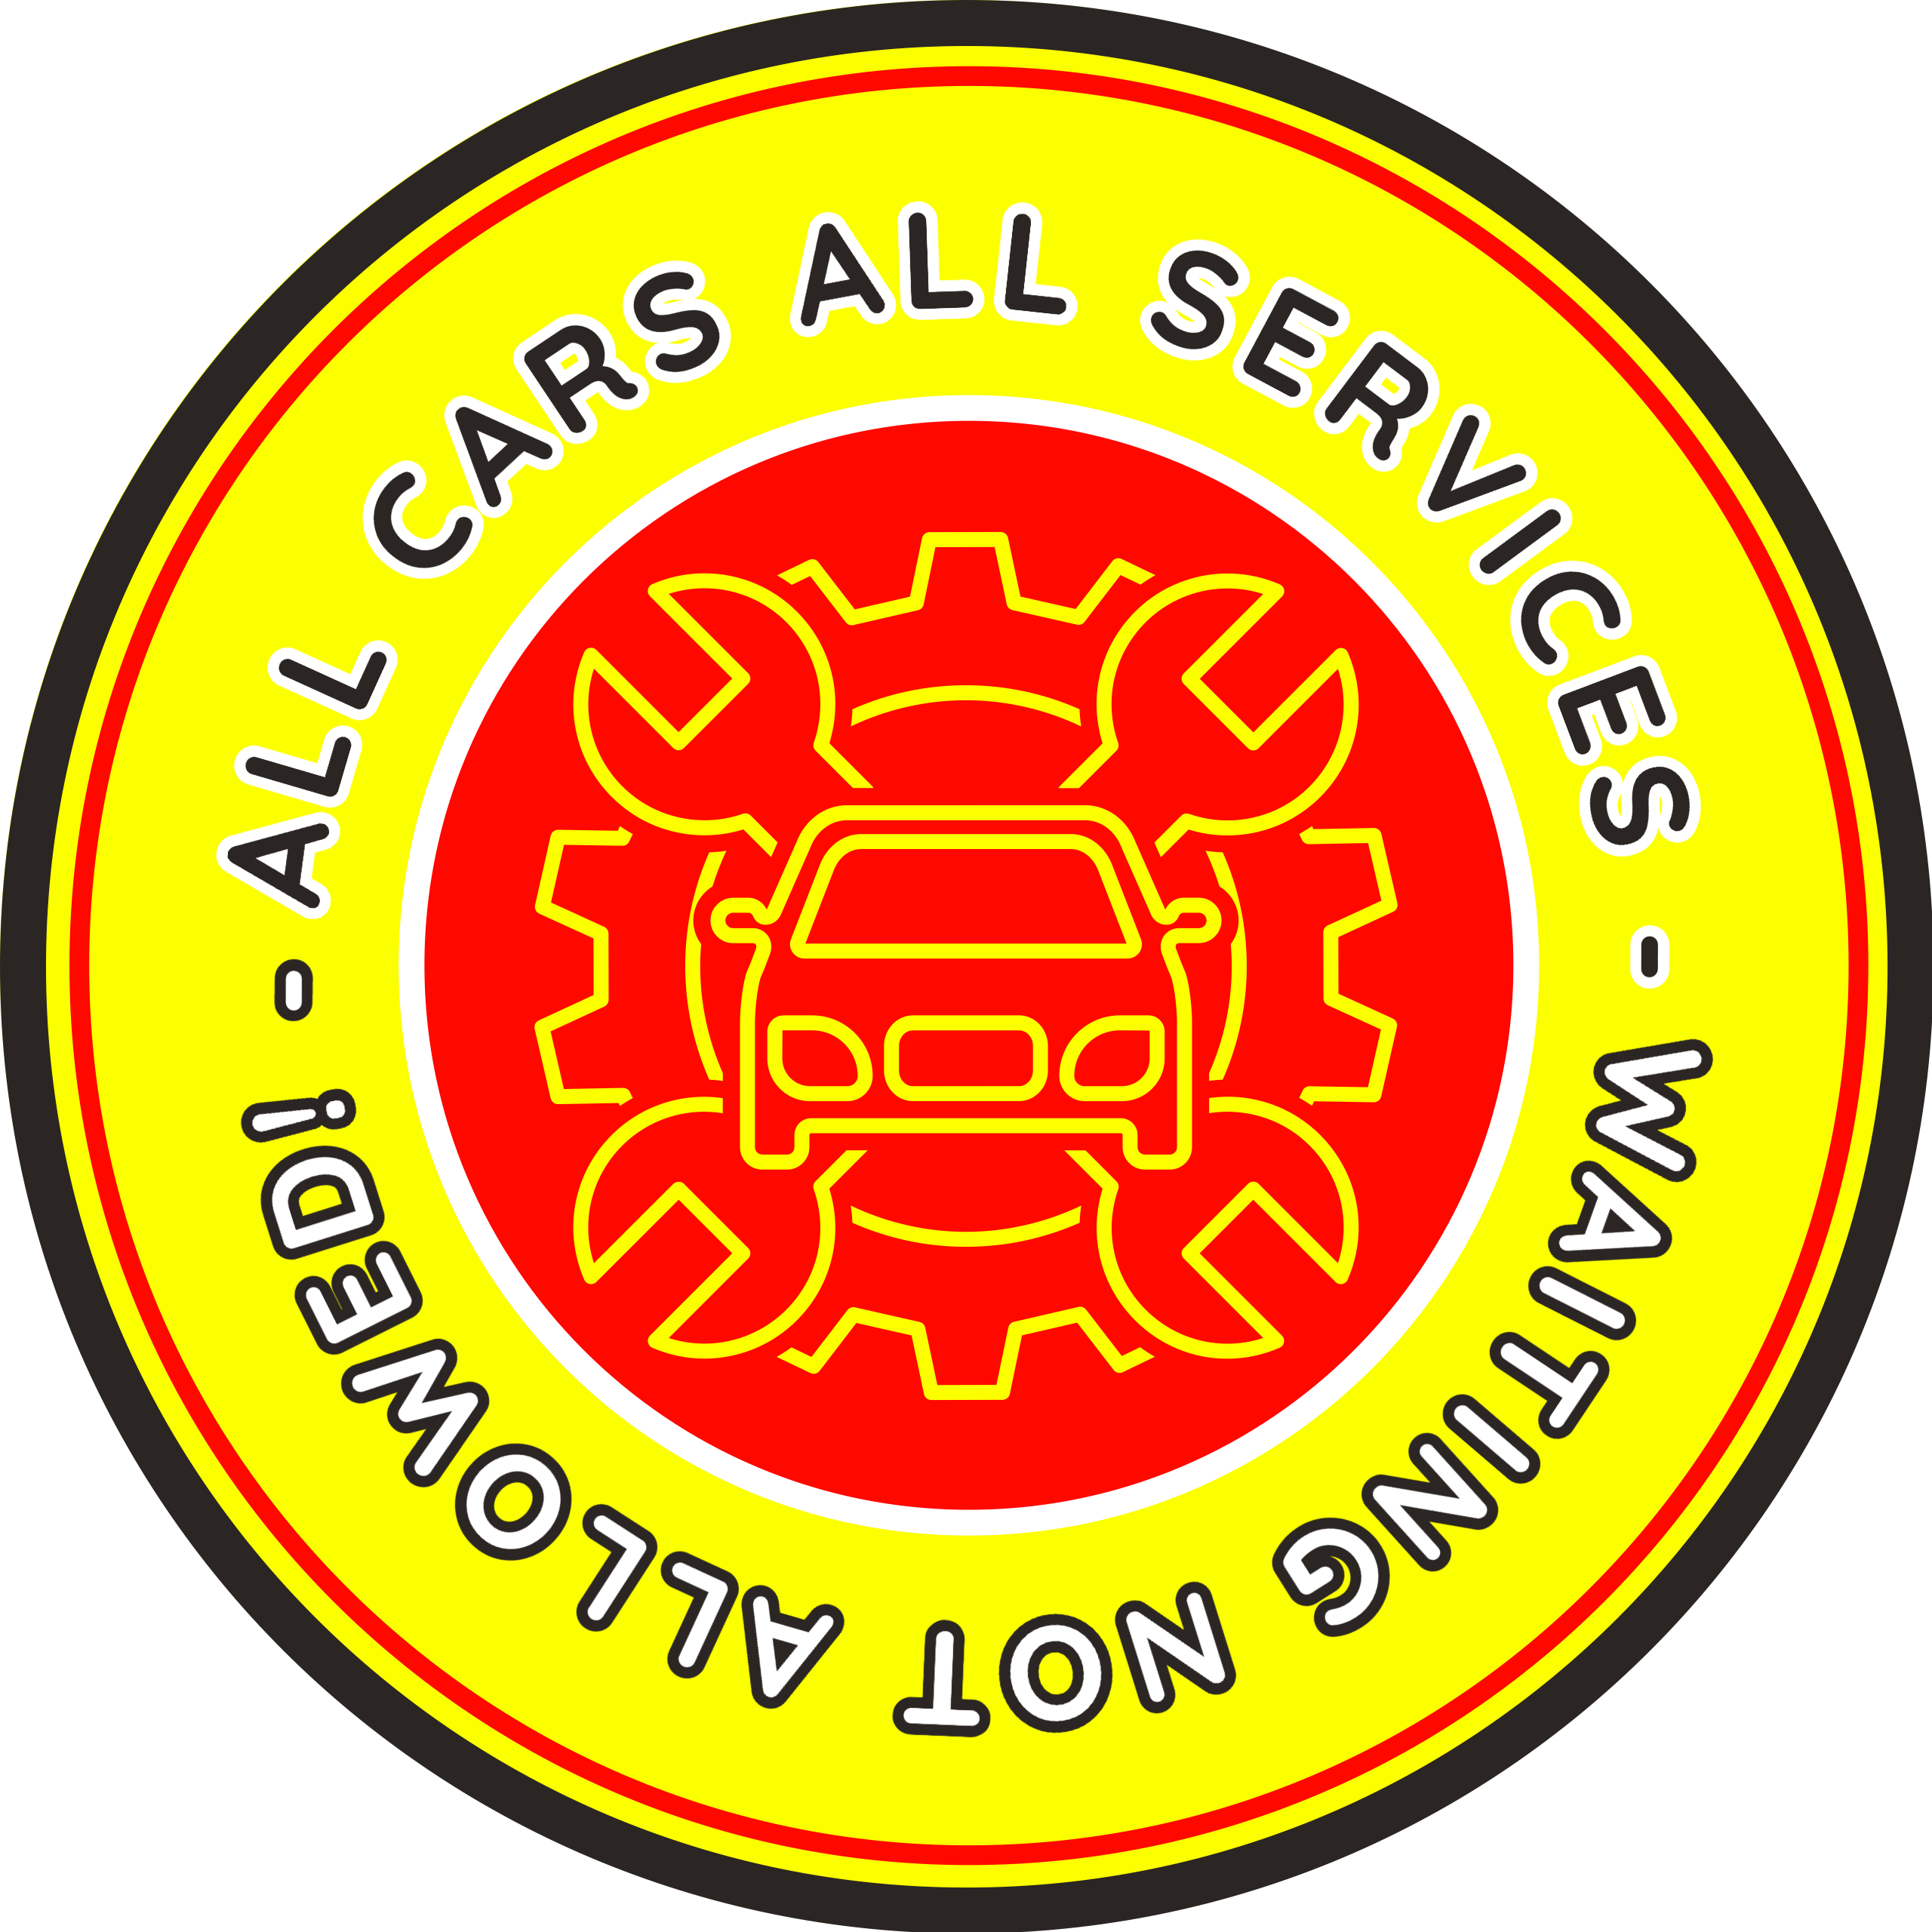 All Cars All Services